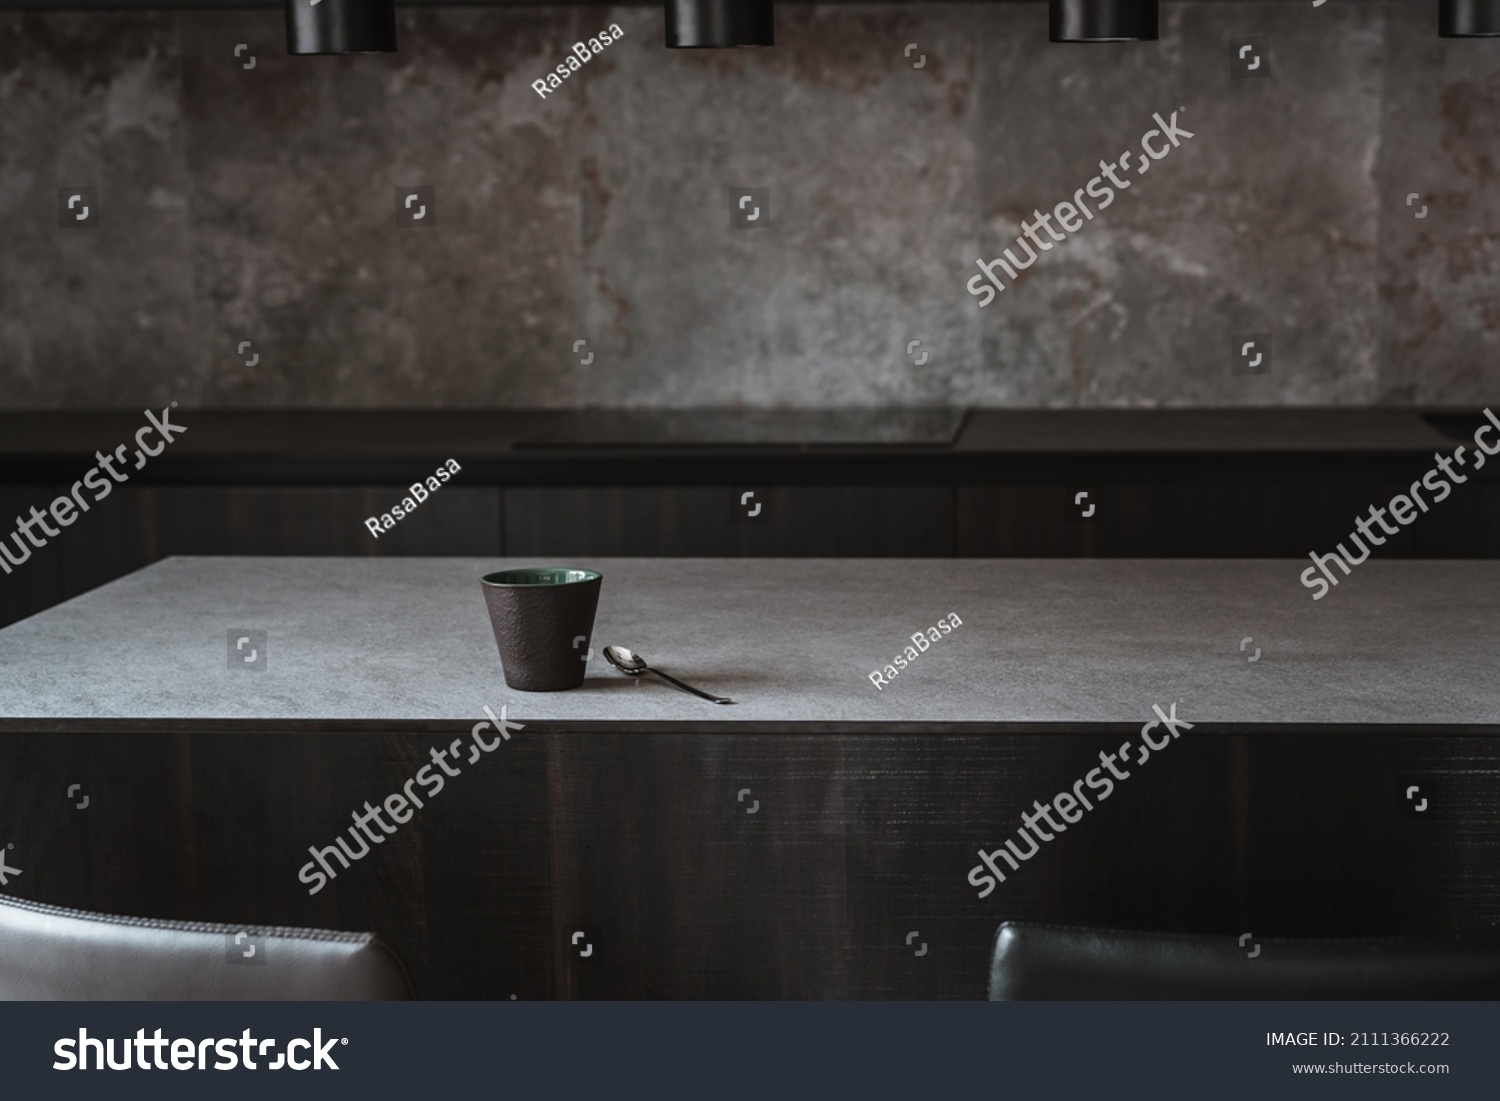 Beautiful coffee cup on island or table countertop in modern home kitchen. Dark grey kitchen design - detail of interior. #2111366222